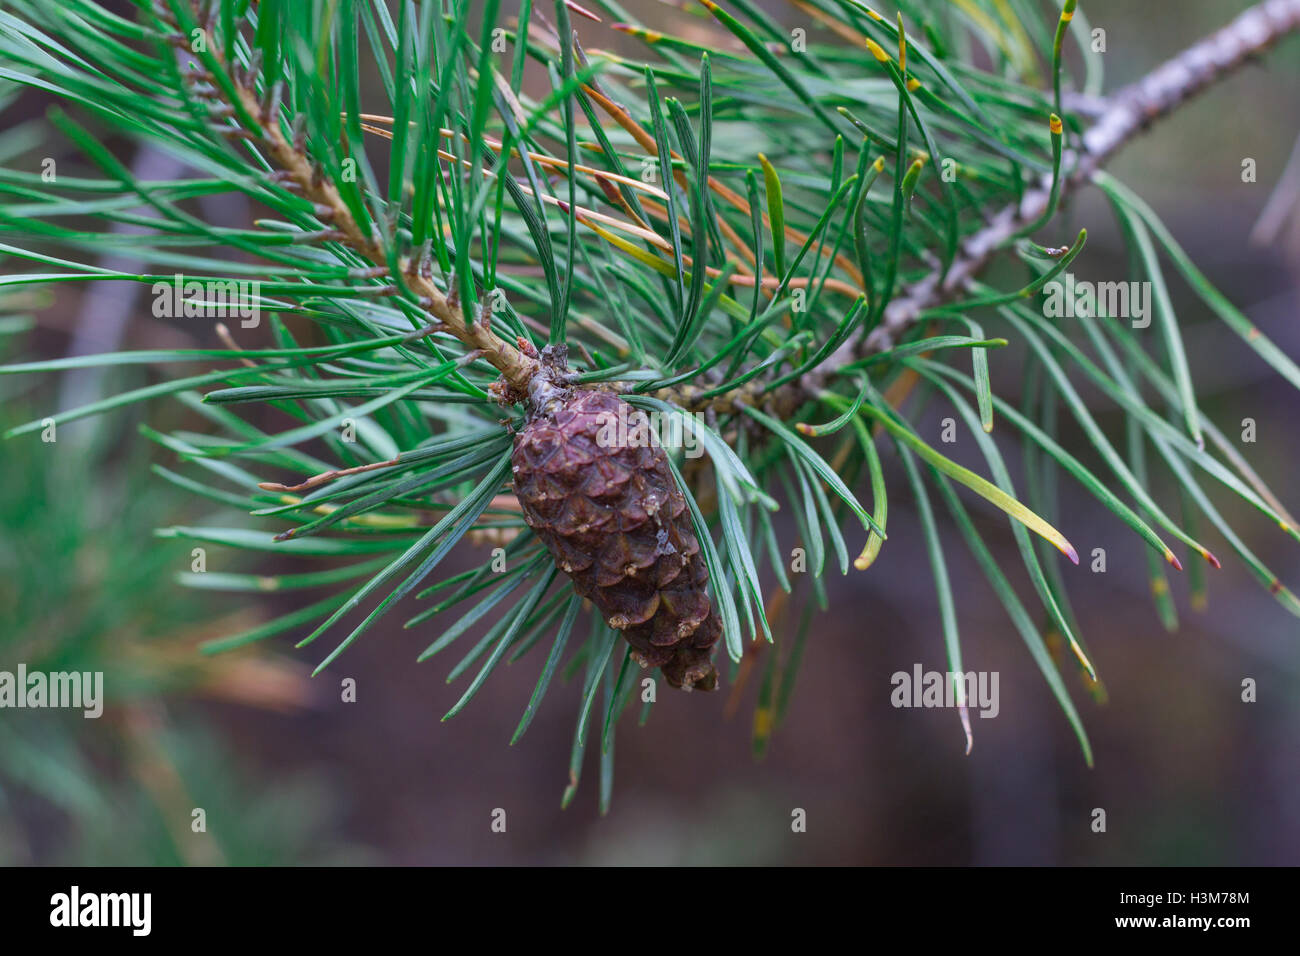 Close-up of pinecone on pine tree branch in coniferous forest Stock Photo